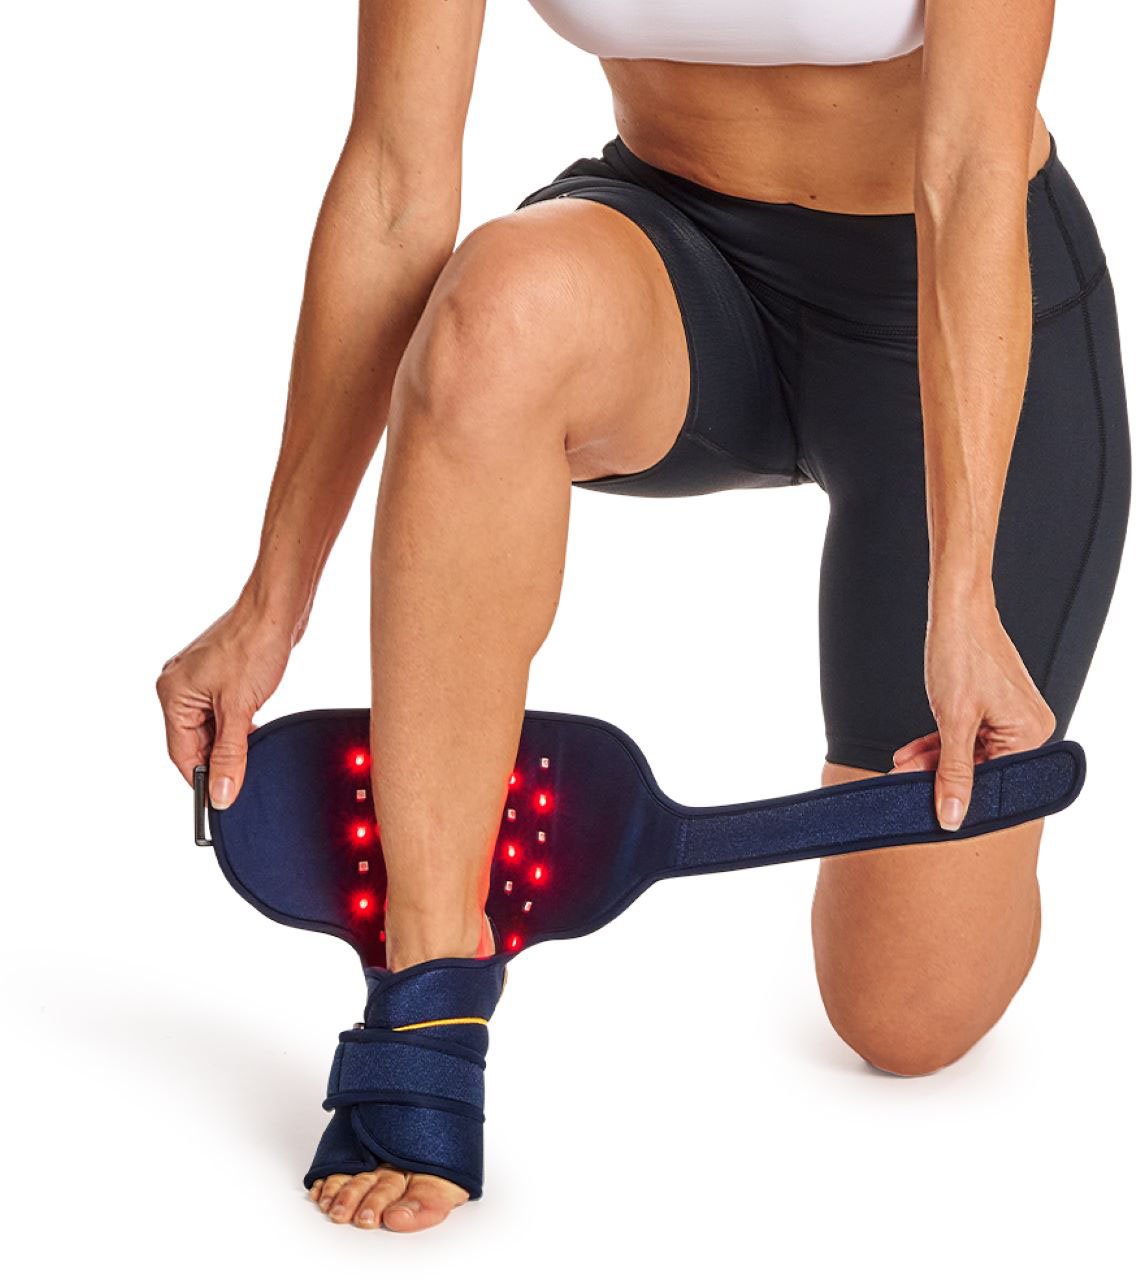 CopperJoint Offers Launch Discount on New Knee Braces For Knee Pain